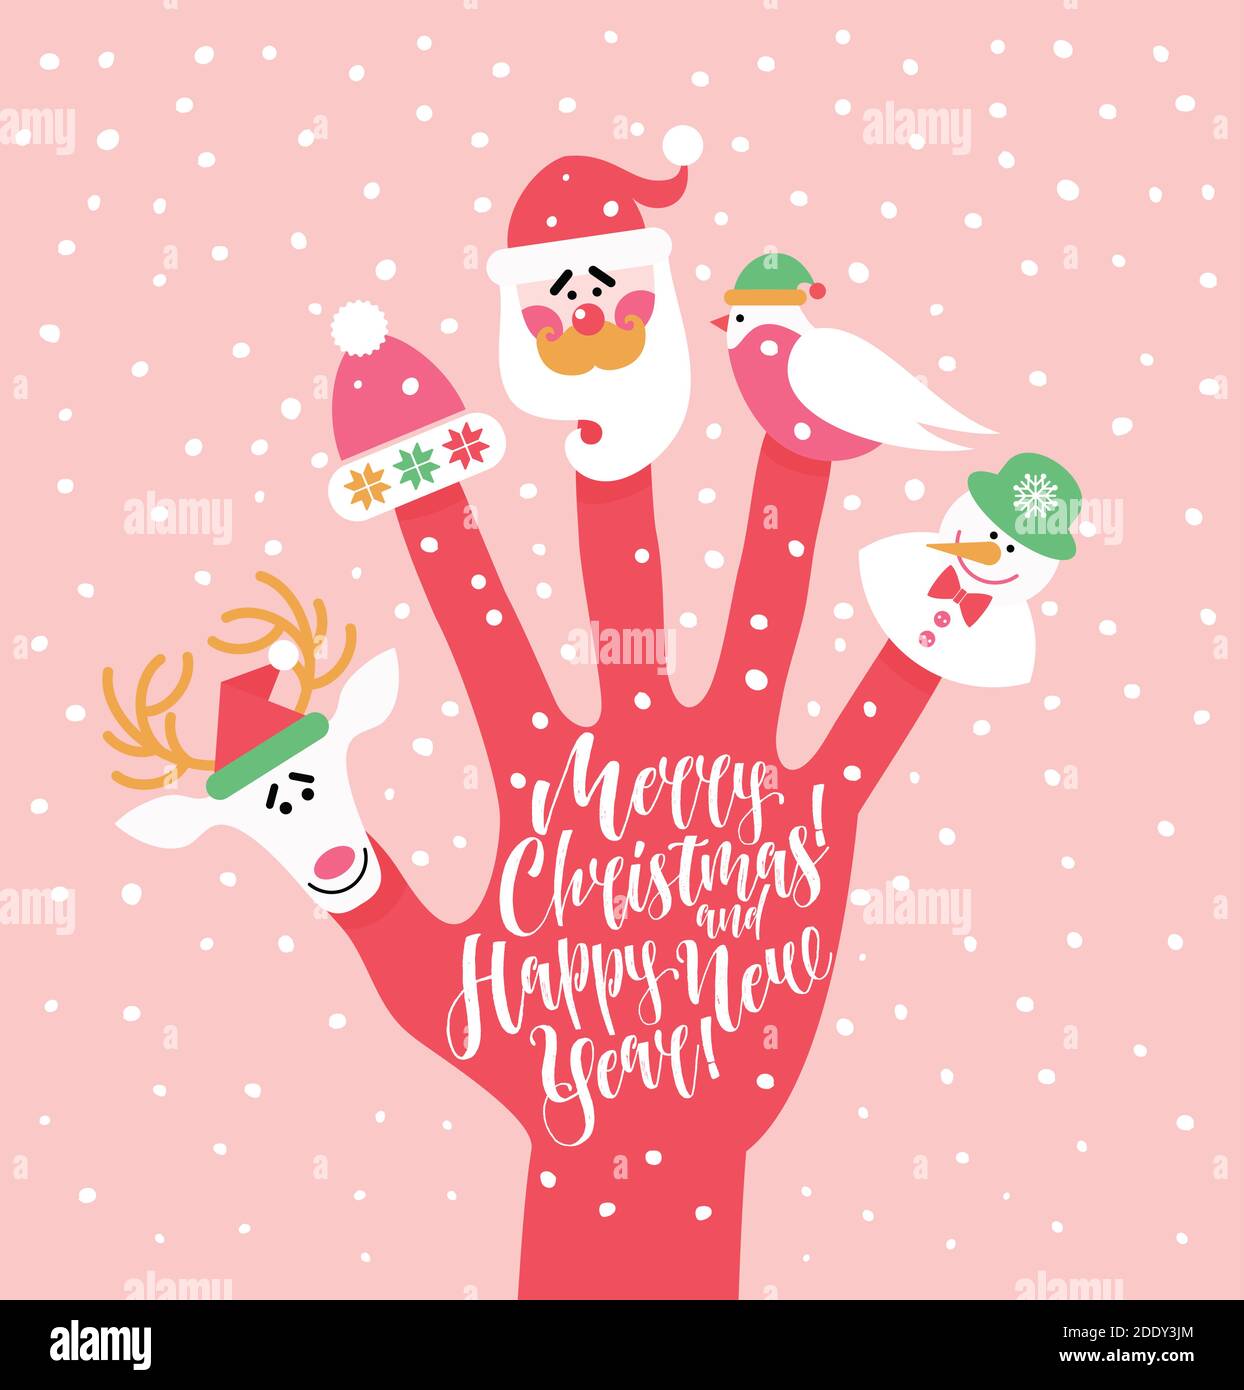 Vector holiday background with finger puppets. Winter cartoon character. Stock Vector